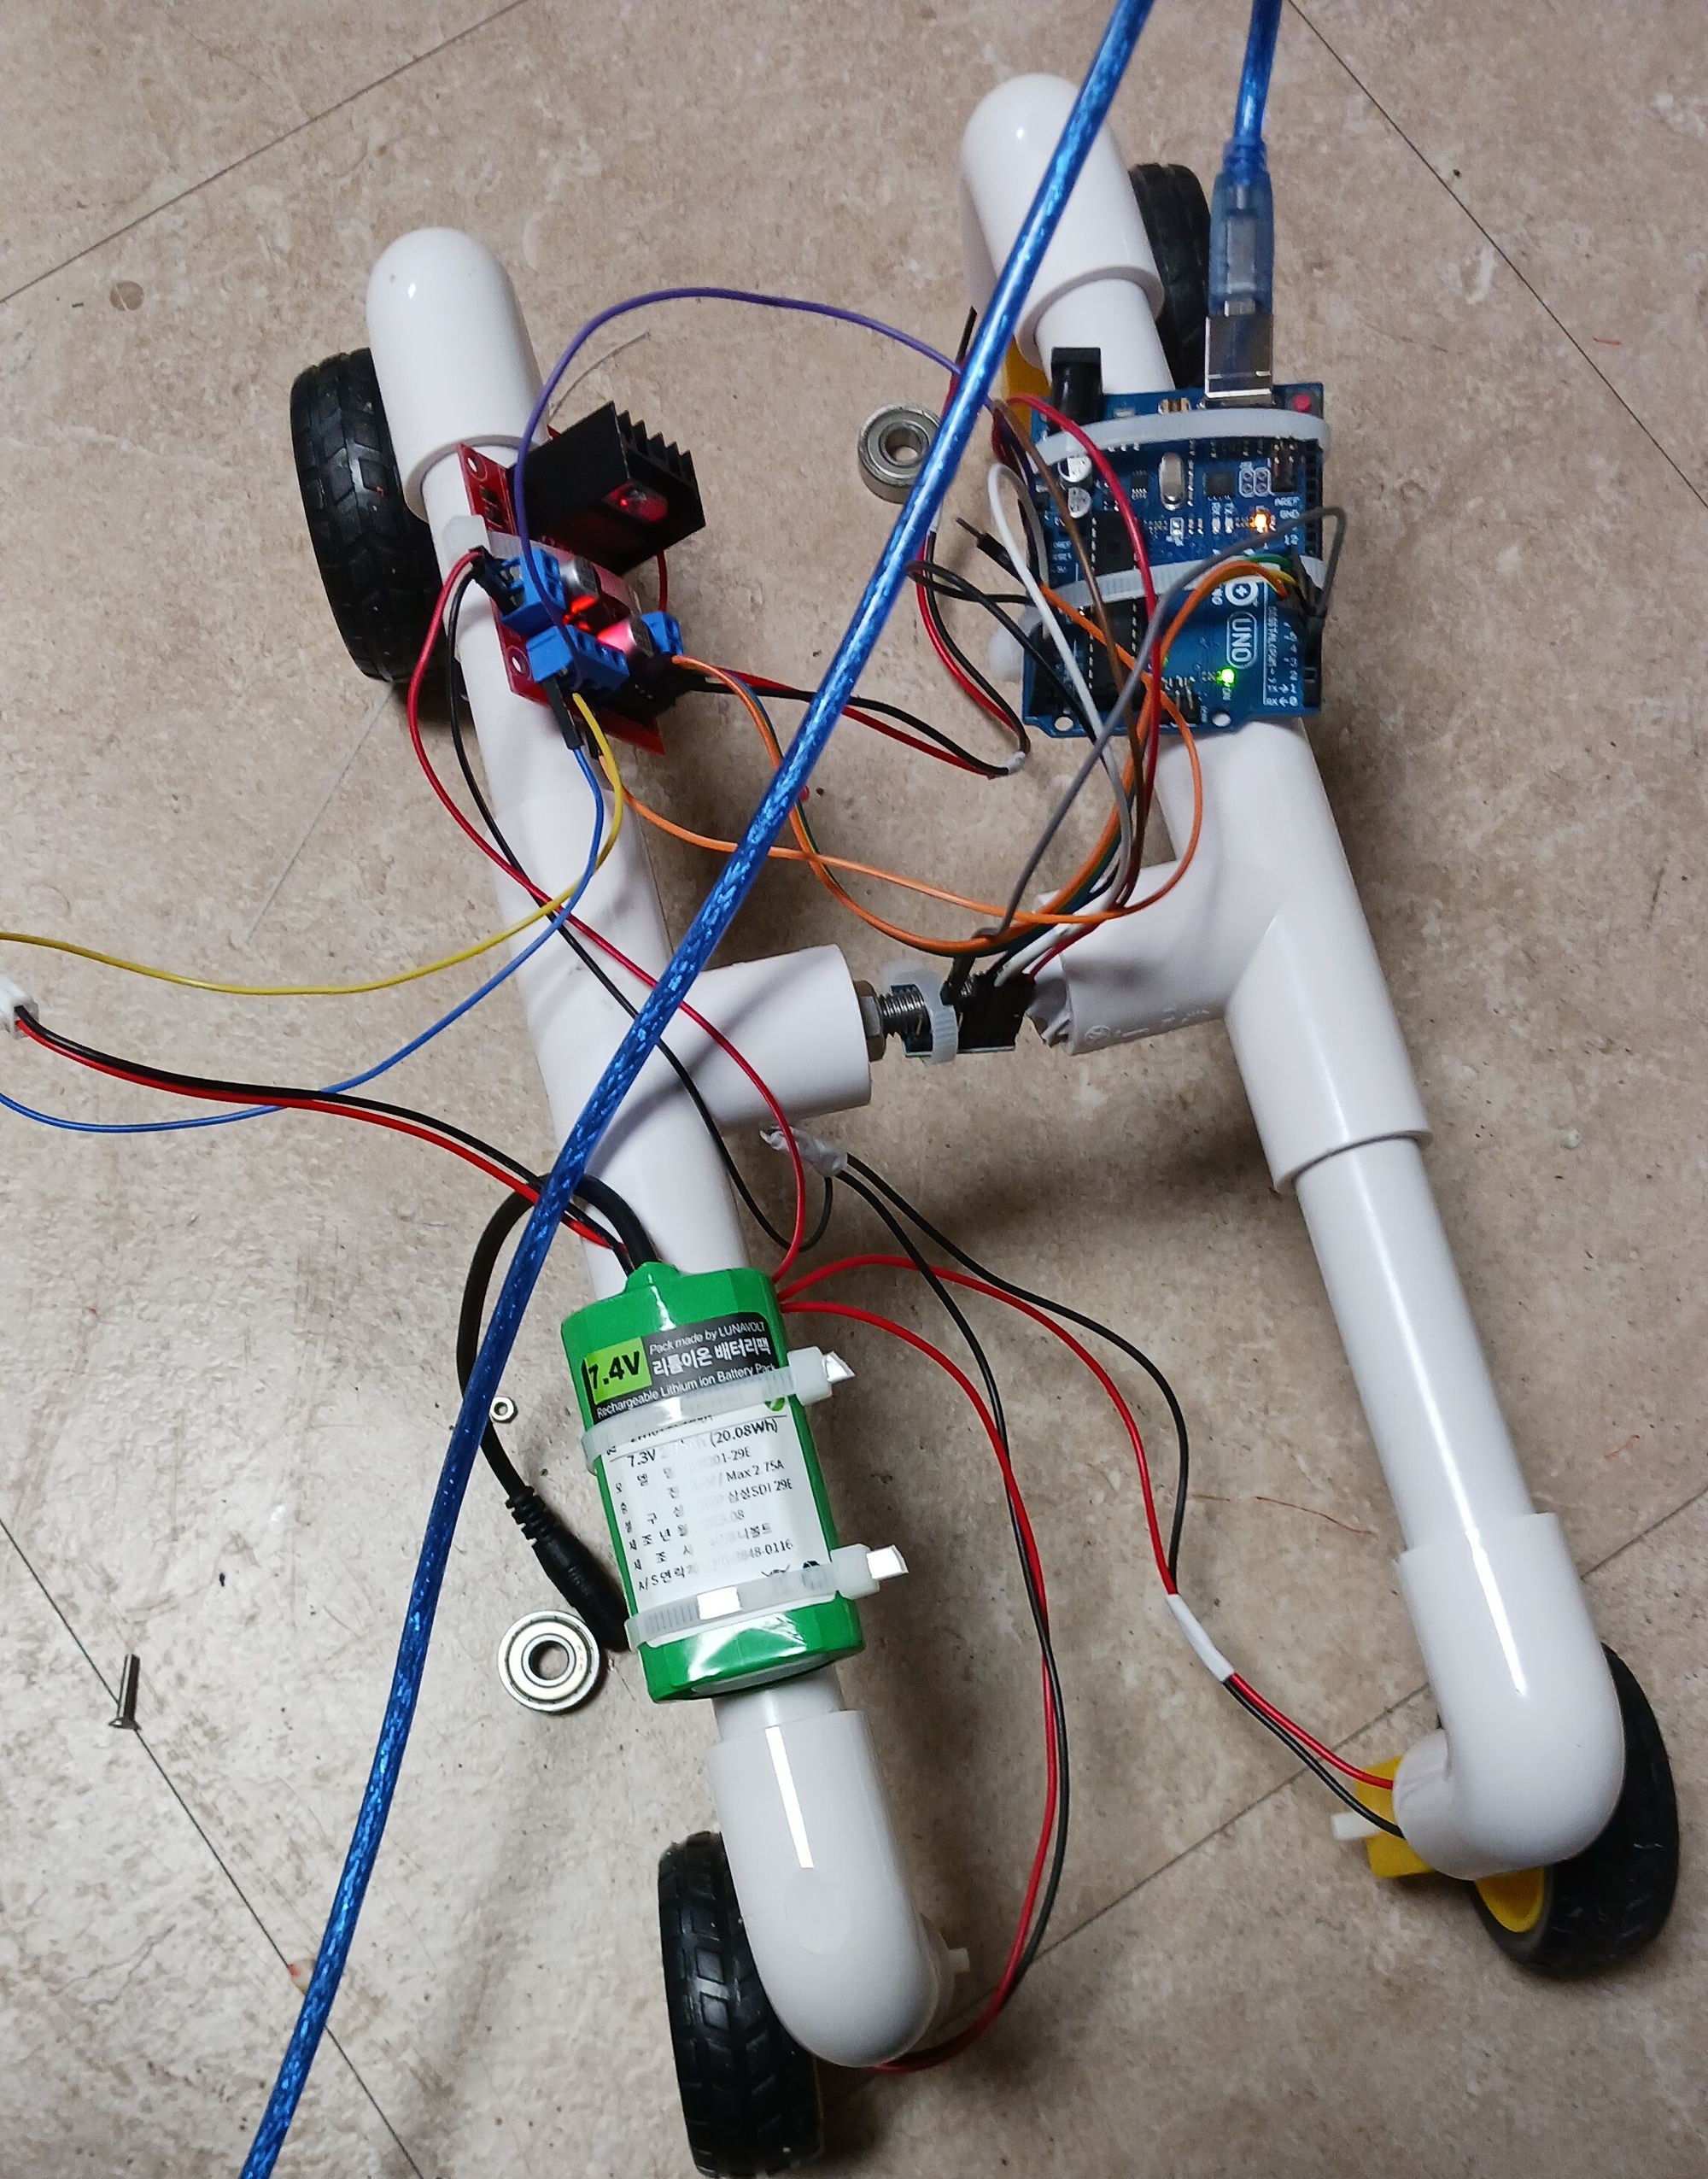 Detecting Rover Motion Using the Accelerometer and Returning It to the Original Position